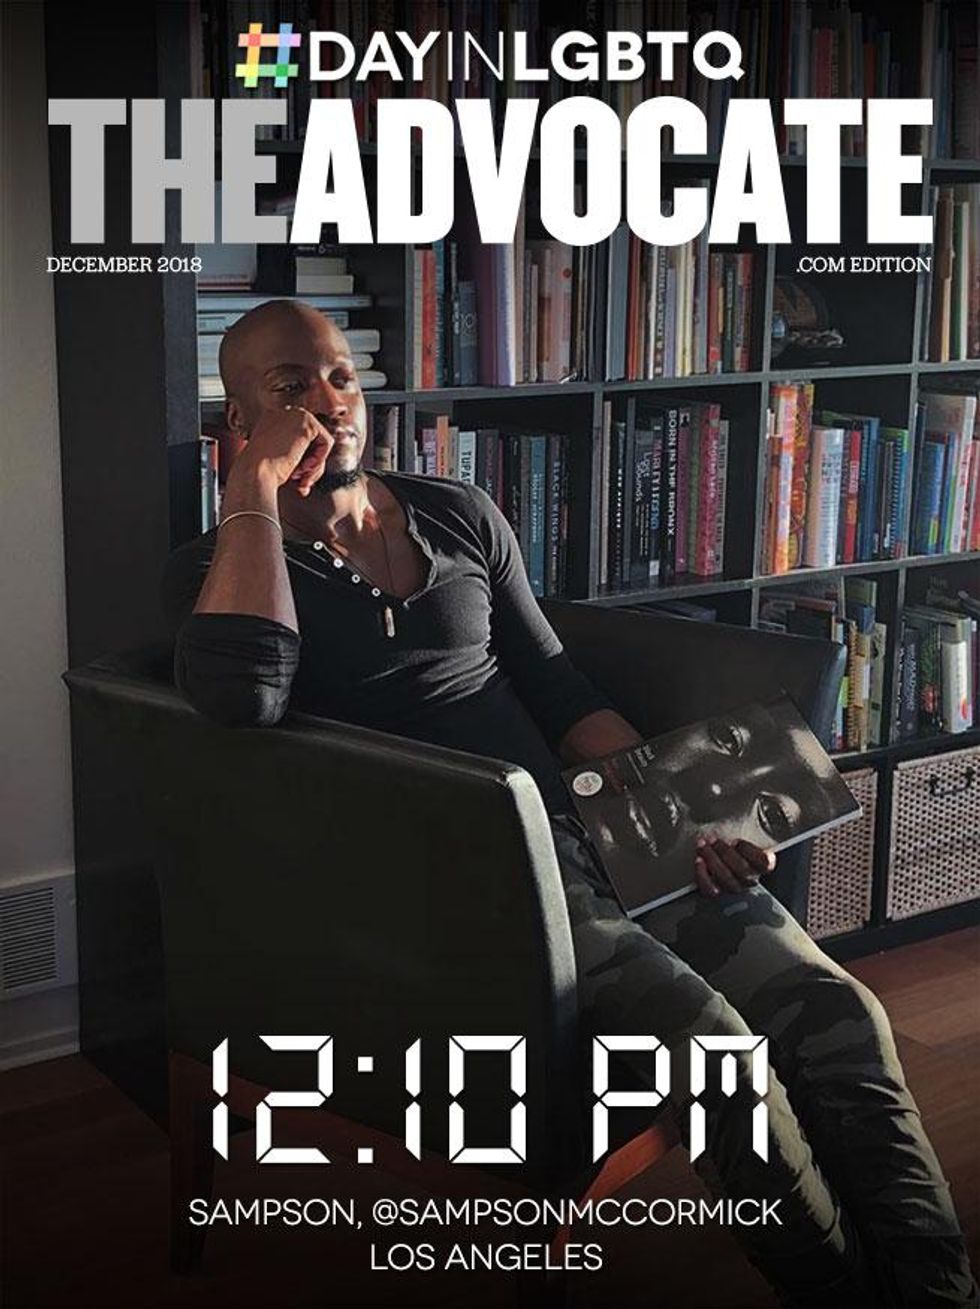 12-10-sampsonmccormick-theadvocate-2018-dayinlgbt-cover-template-655